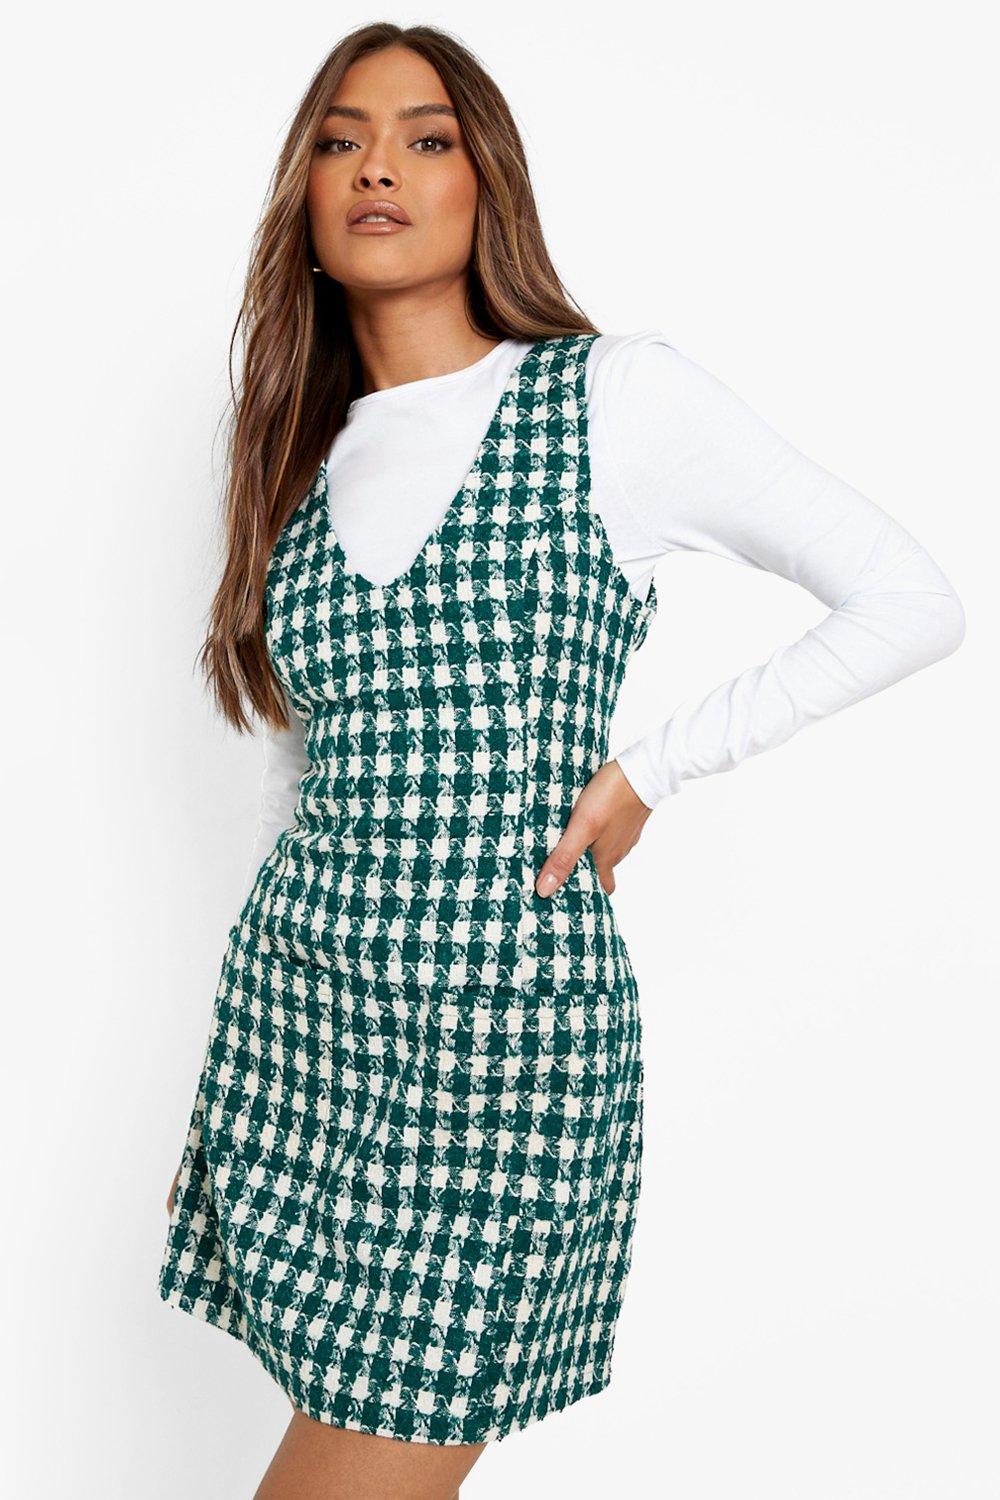 60s Mod Clothing Outfit Ideas Womens Dogtooth Scoop Neck Pinafore Dress - Green - 10 $24.00 AT vintagedancer.com